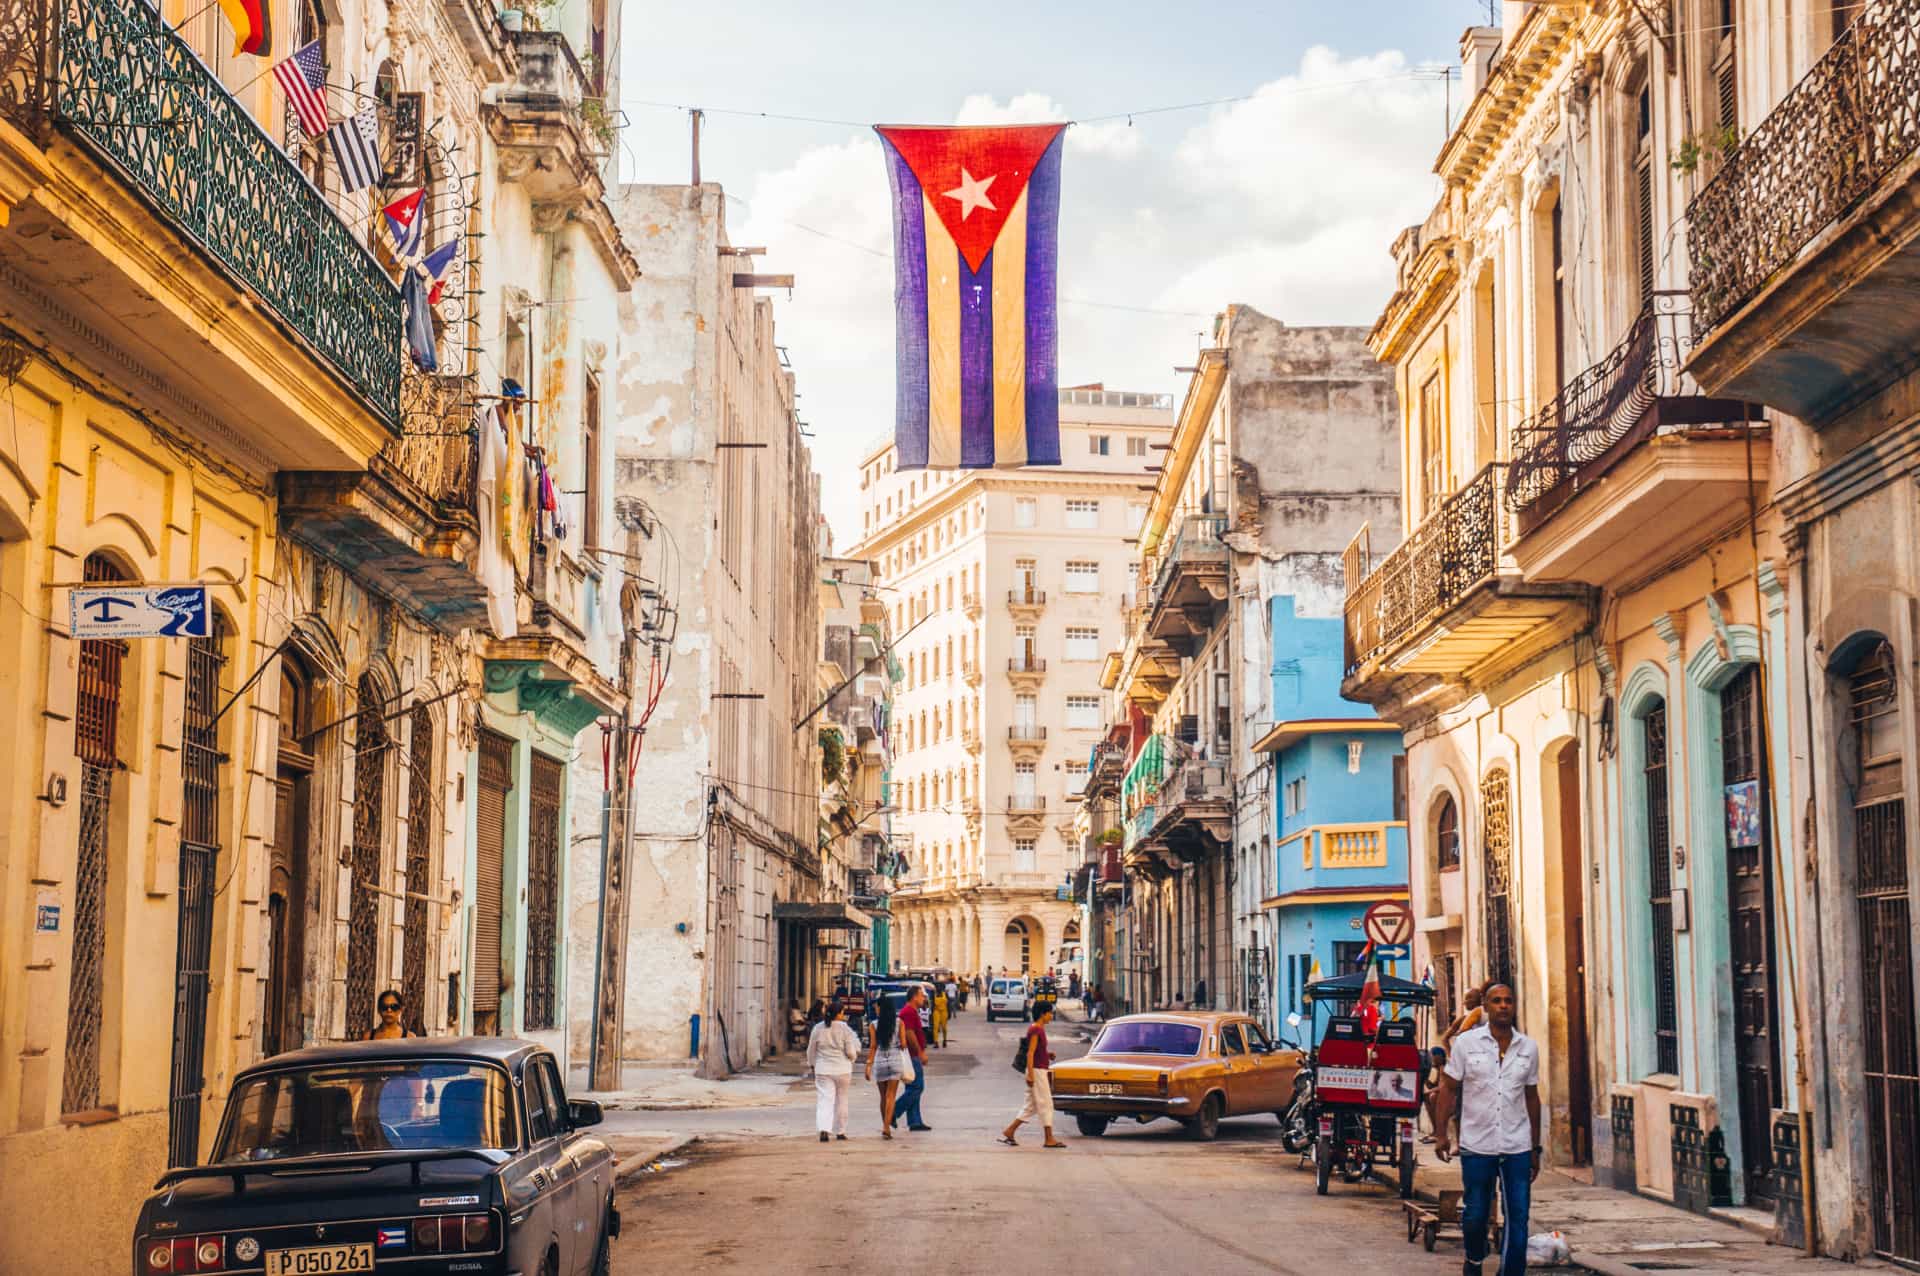 Since 2016, there are no more diplomatic impediments preventing Americans from going to this neighboring Caribbean nation. Despite the embargo, Cubans love Americans and America, as many of them made the US their home as refugees during and after the Cuban revolution.